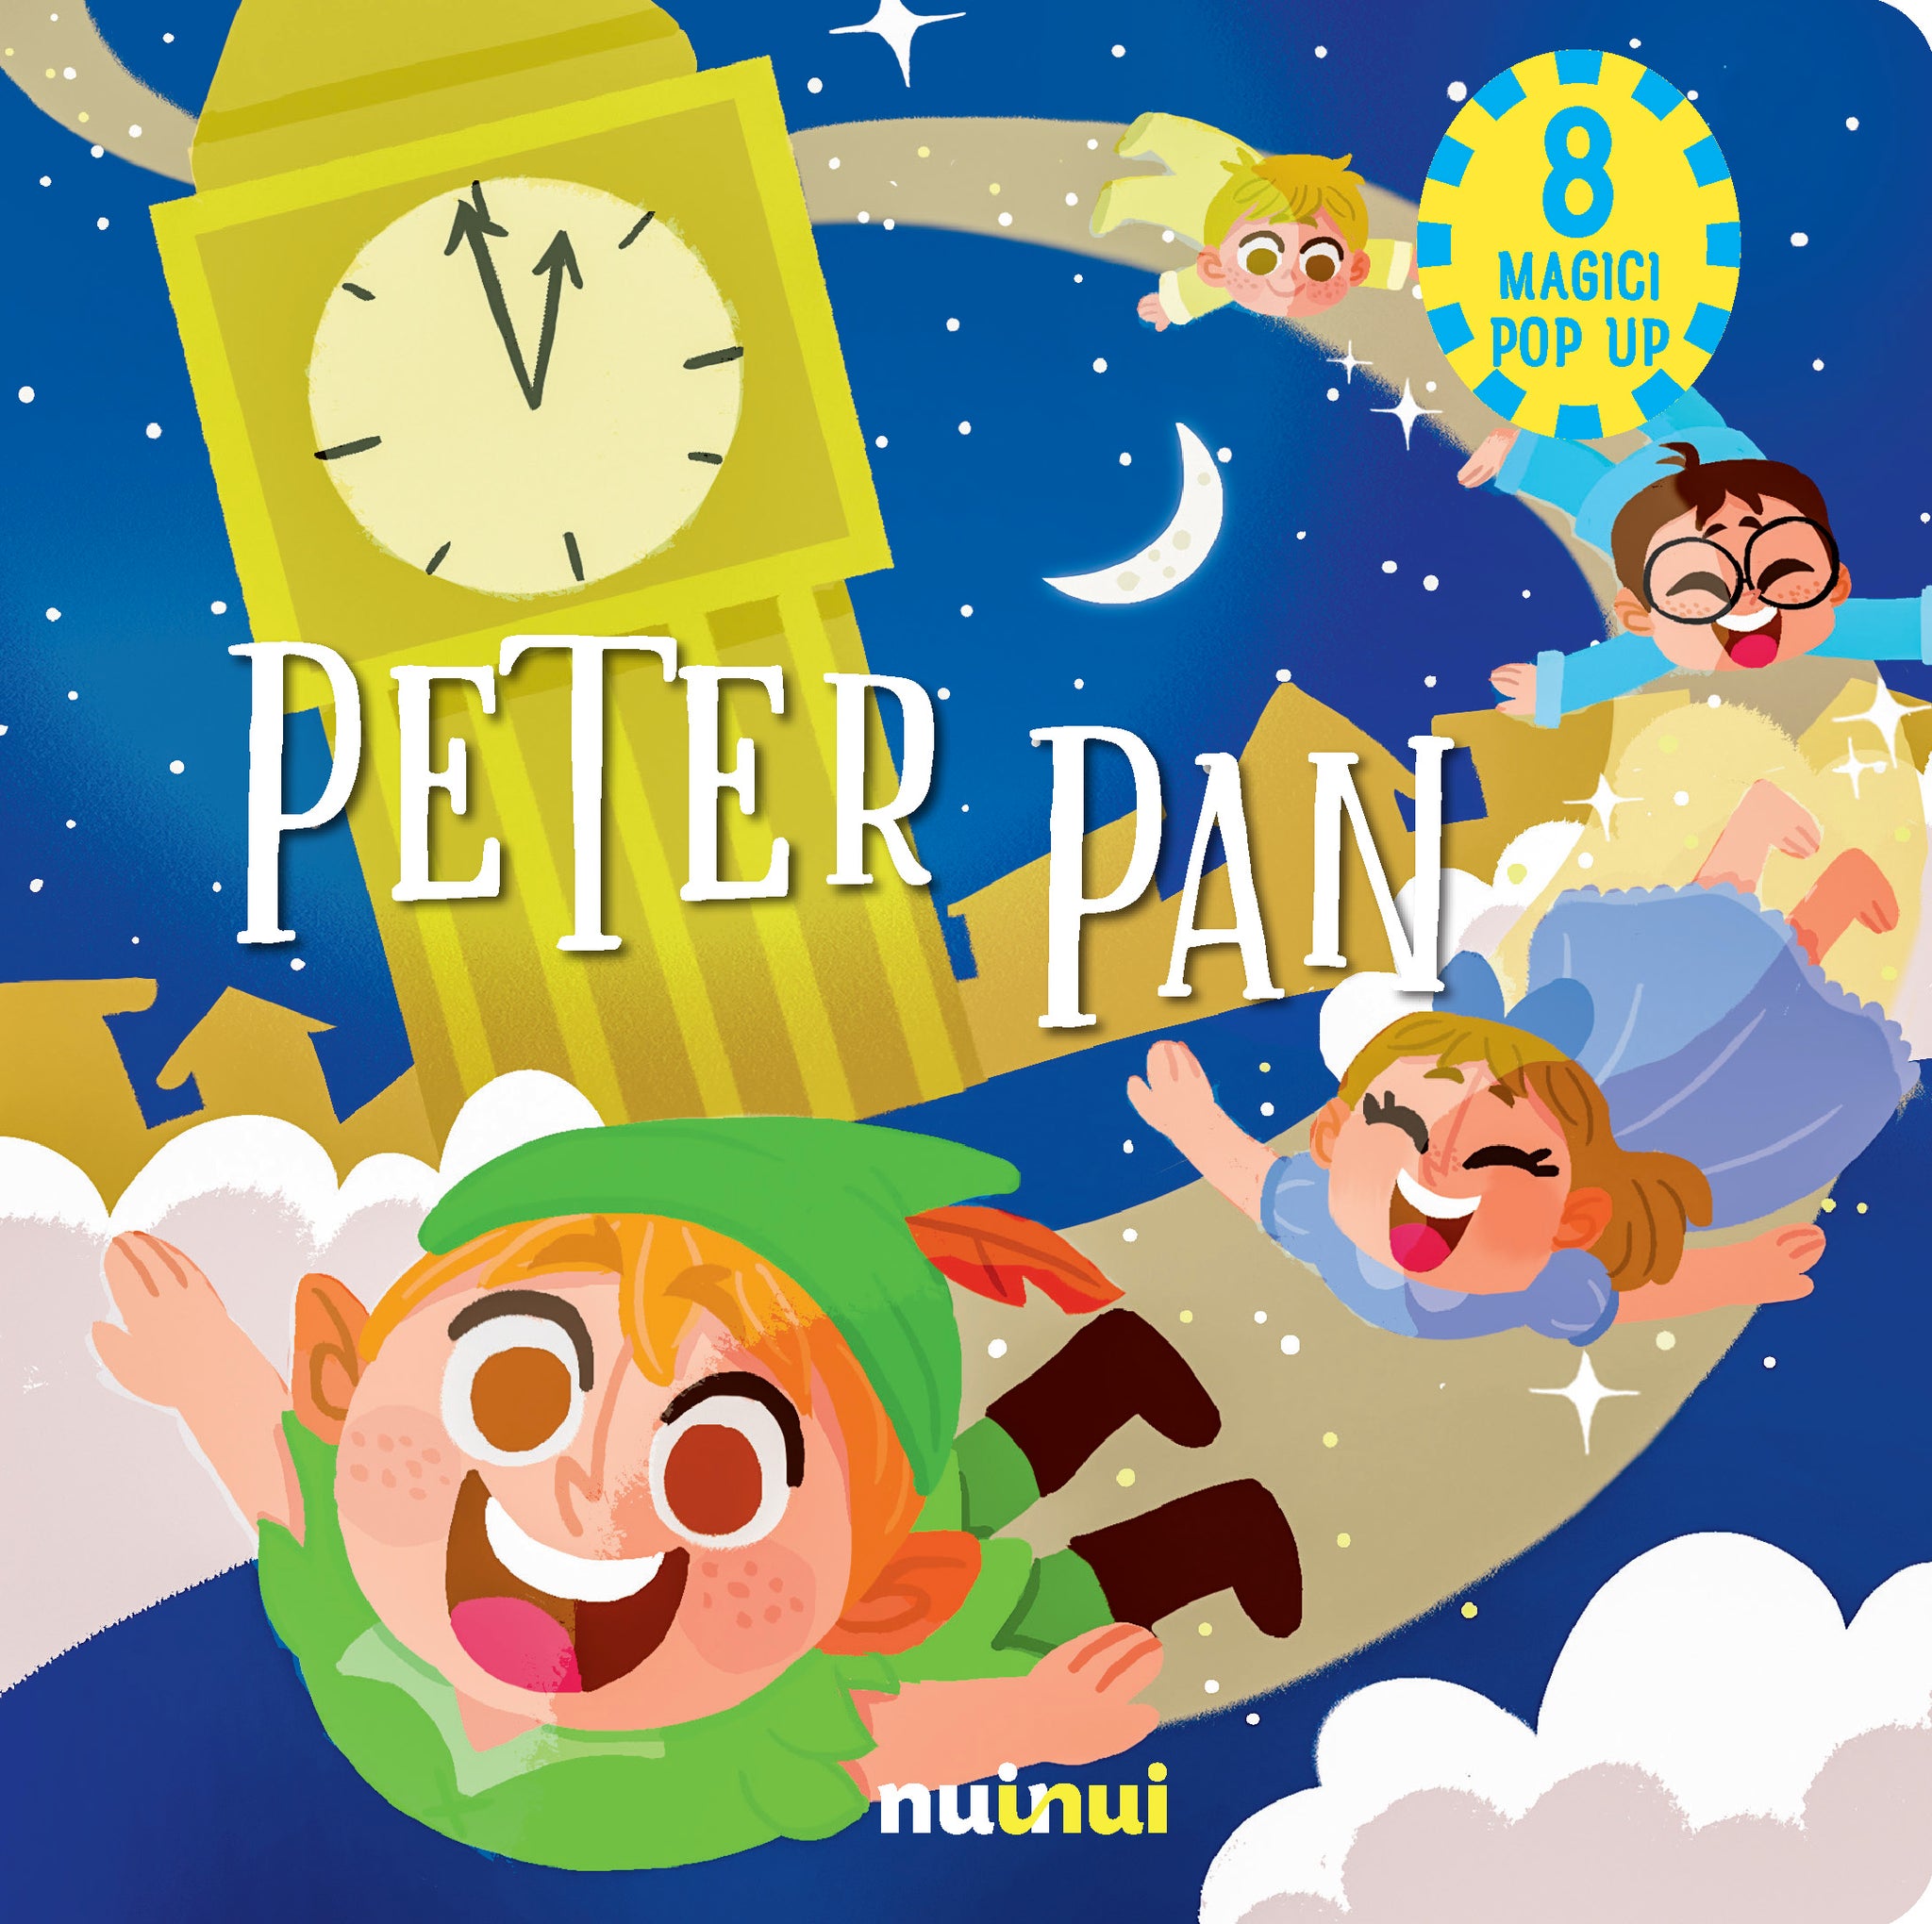 Fiabe pop up - Peter Pan